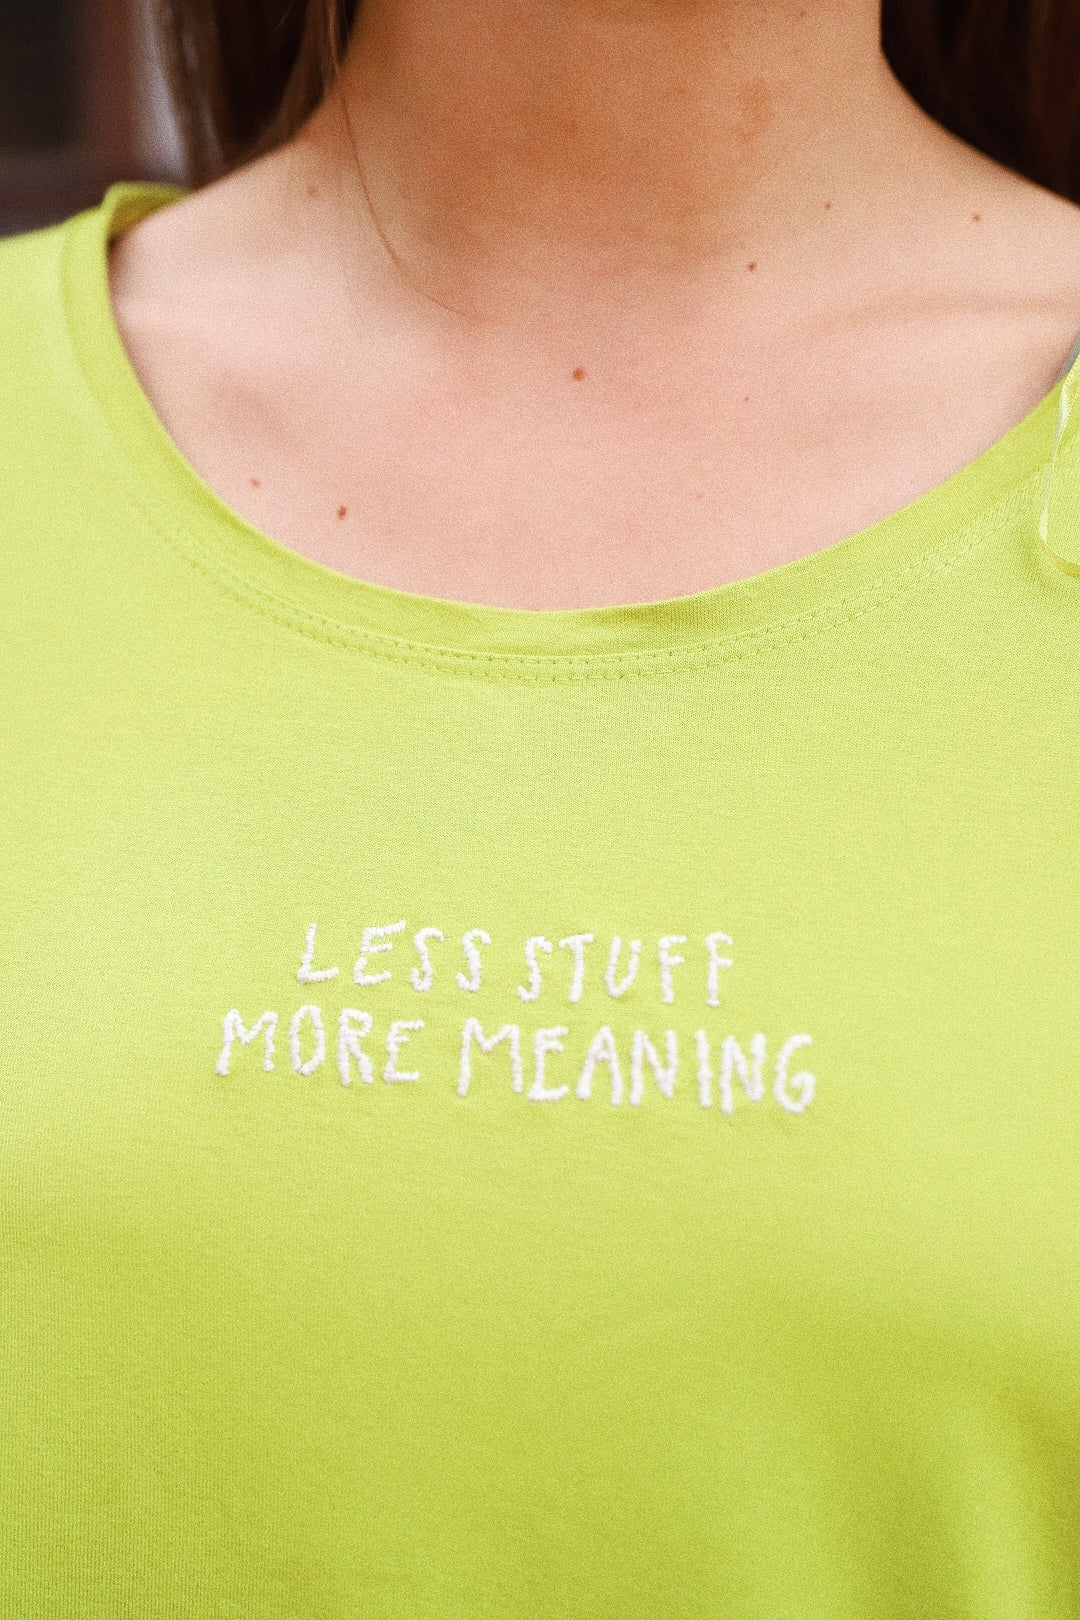 Less stuff more meaning